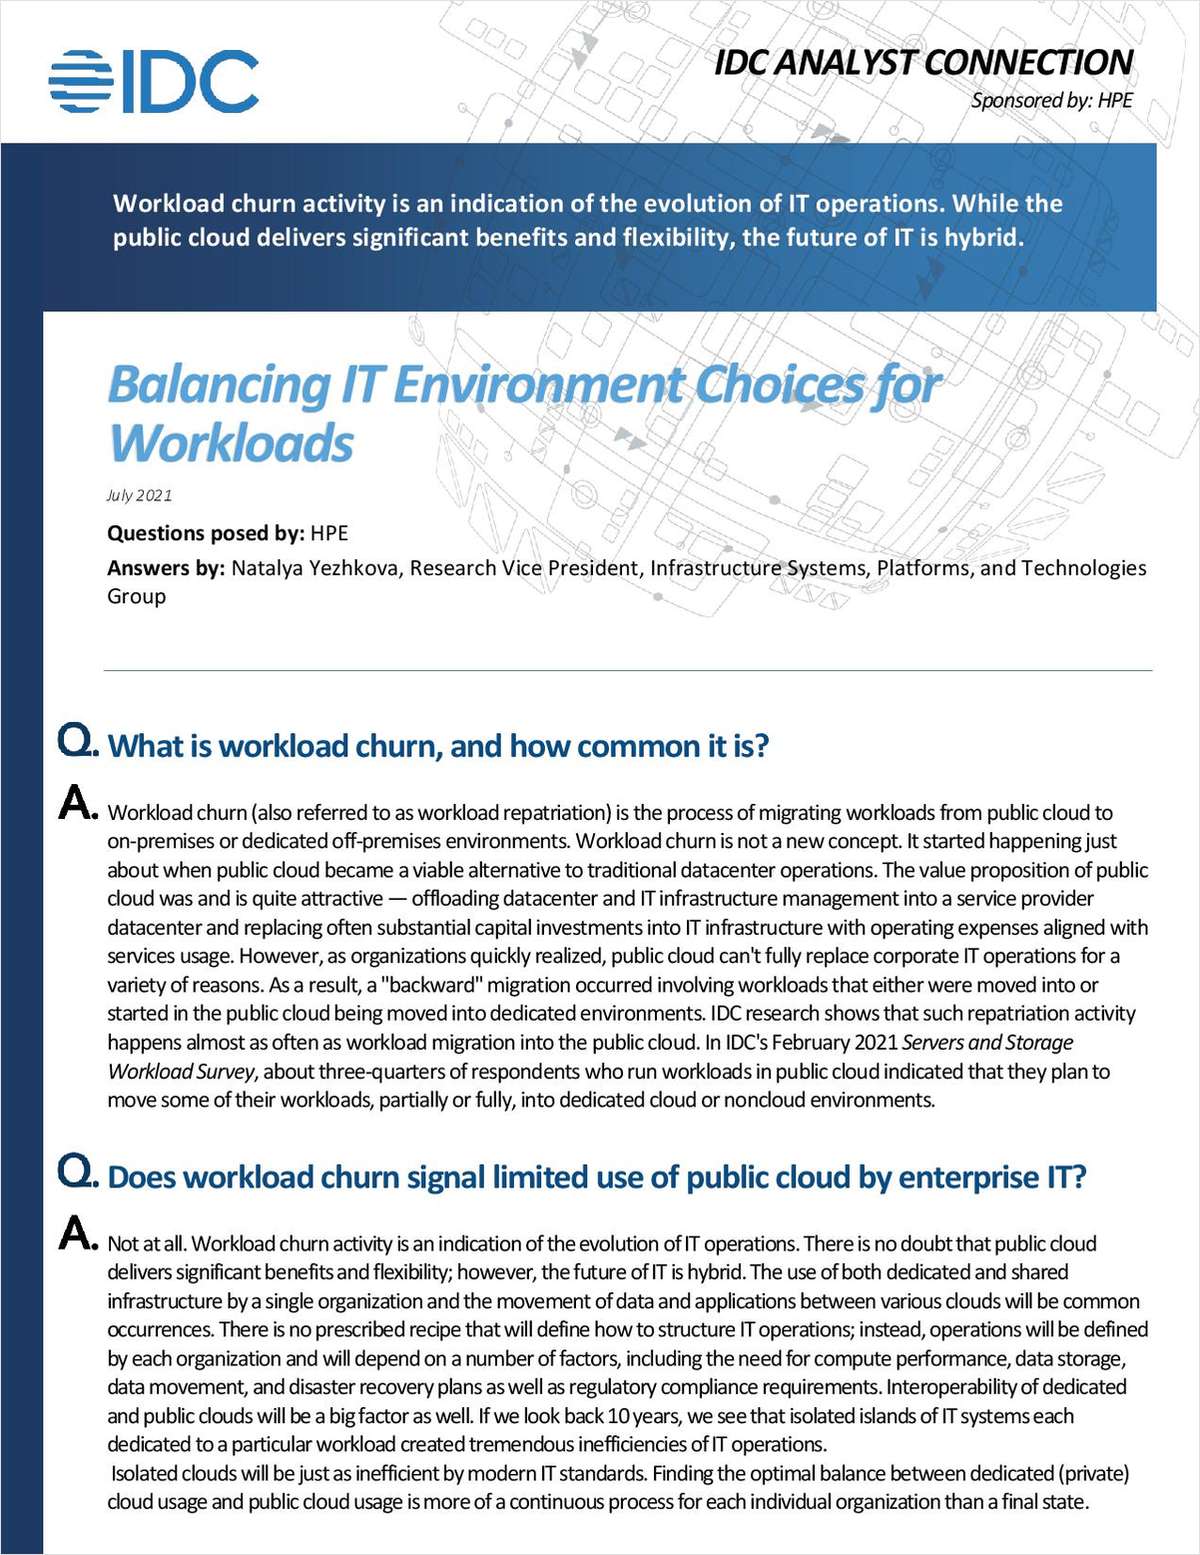 Balancing IT Environment Choices for Workloads